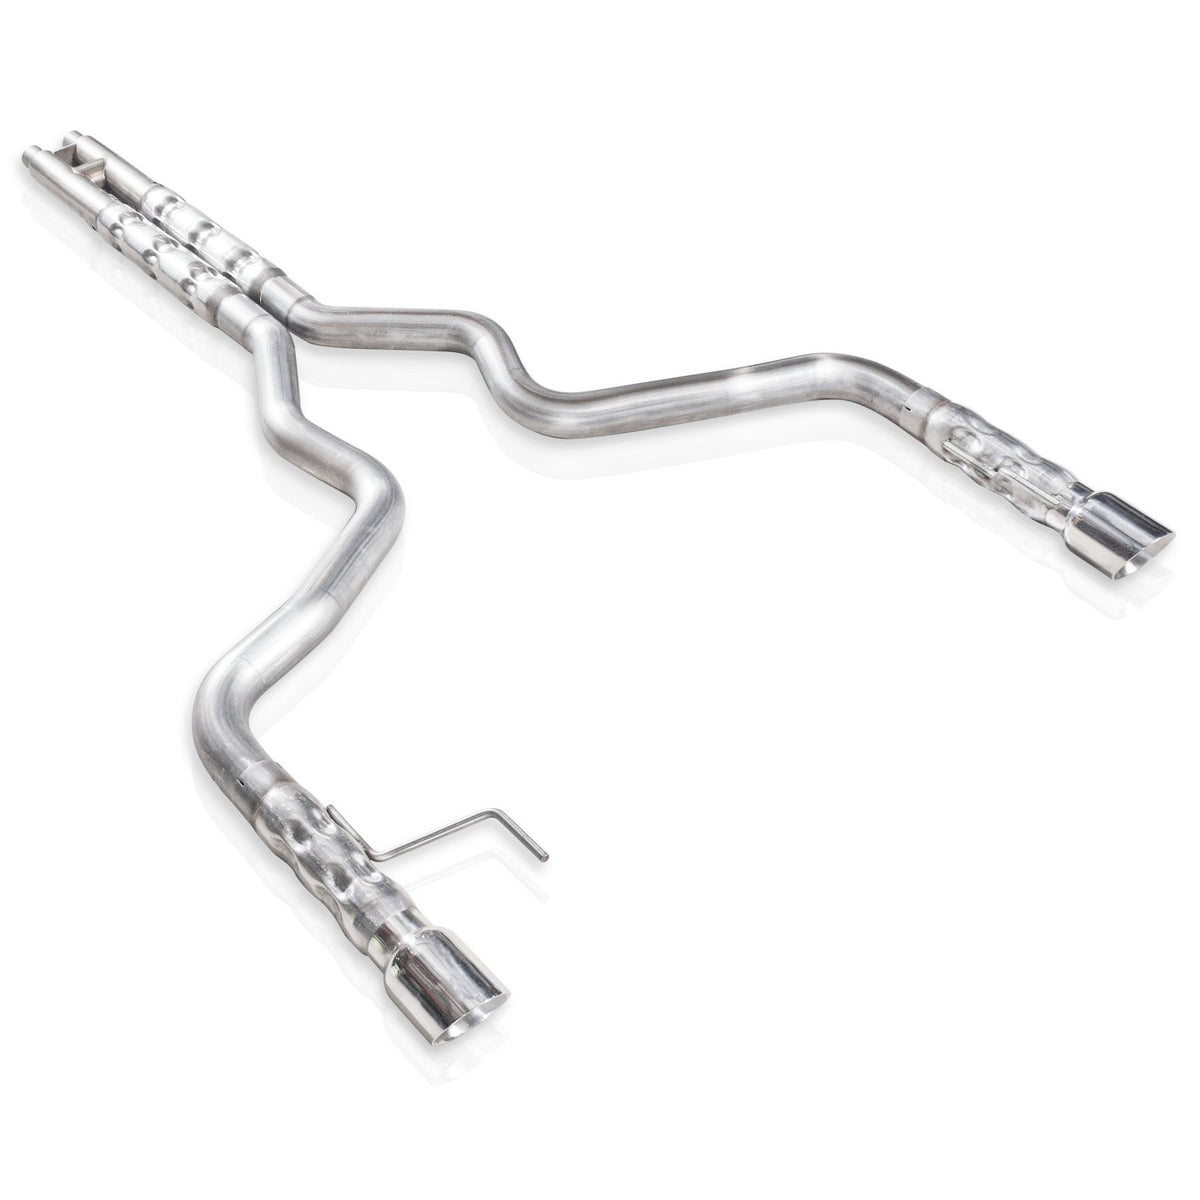 STAINLESS WORKS Mustang GT 5.0L 2015-2017 Cat-Back Exhaust Factory Connect H Pipe w/ 2.5&quot; Muffler - Stainless (2015-2017 GT 5.0L